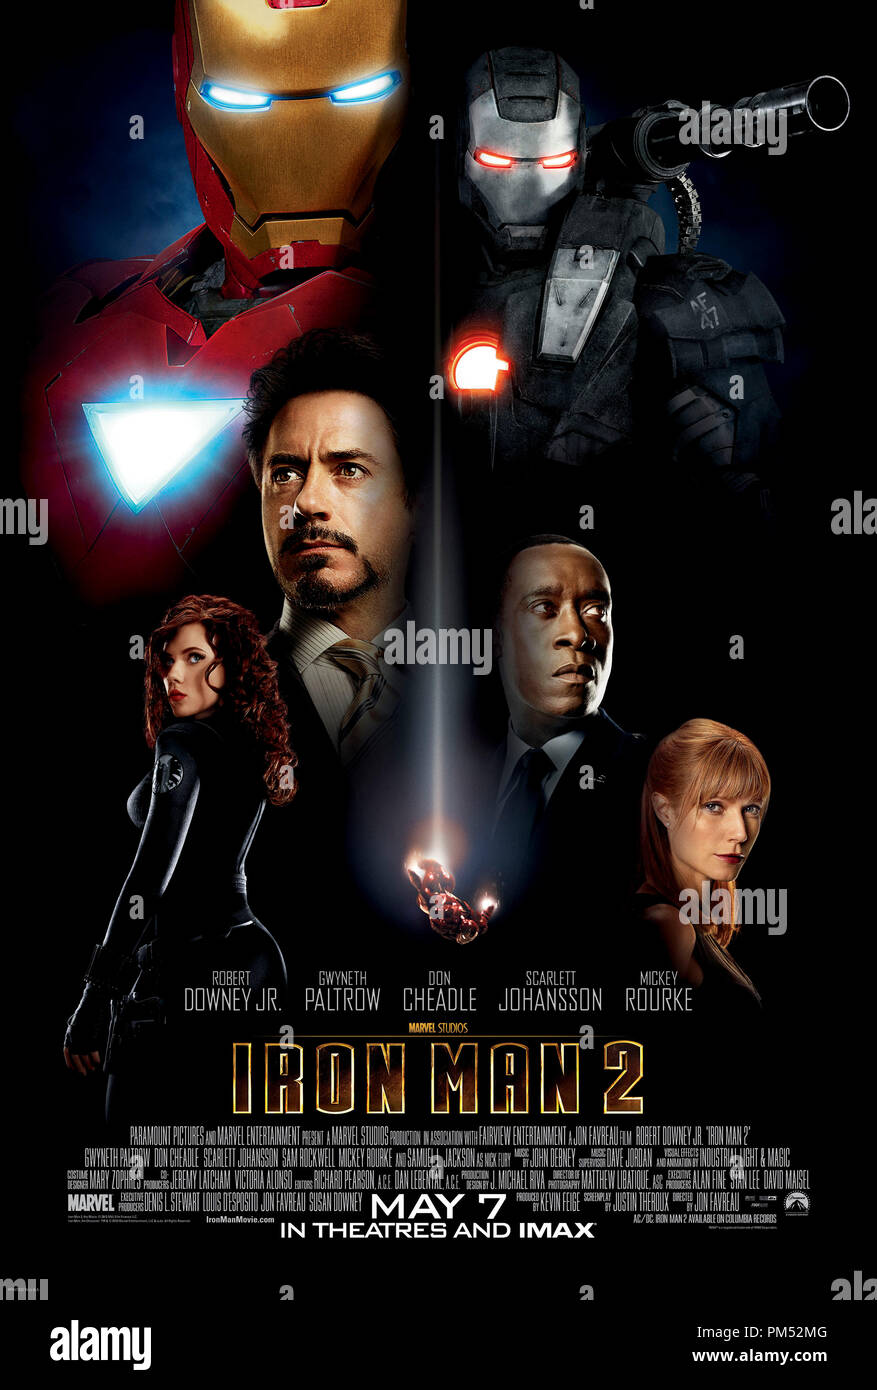 Robert Downey Jr. Completely Backtracked On His Iron Man 4 News |  Cinemablend